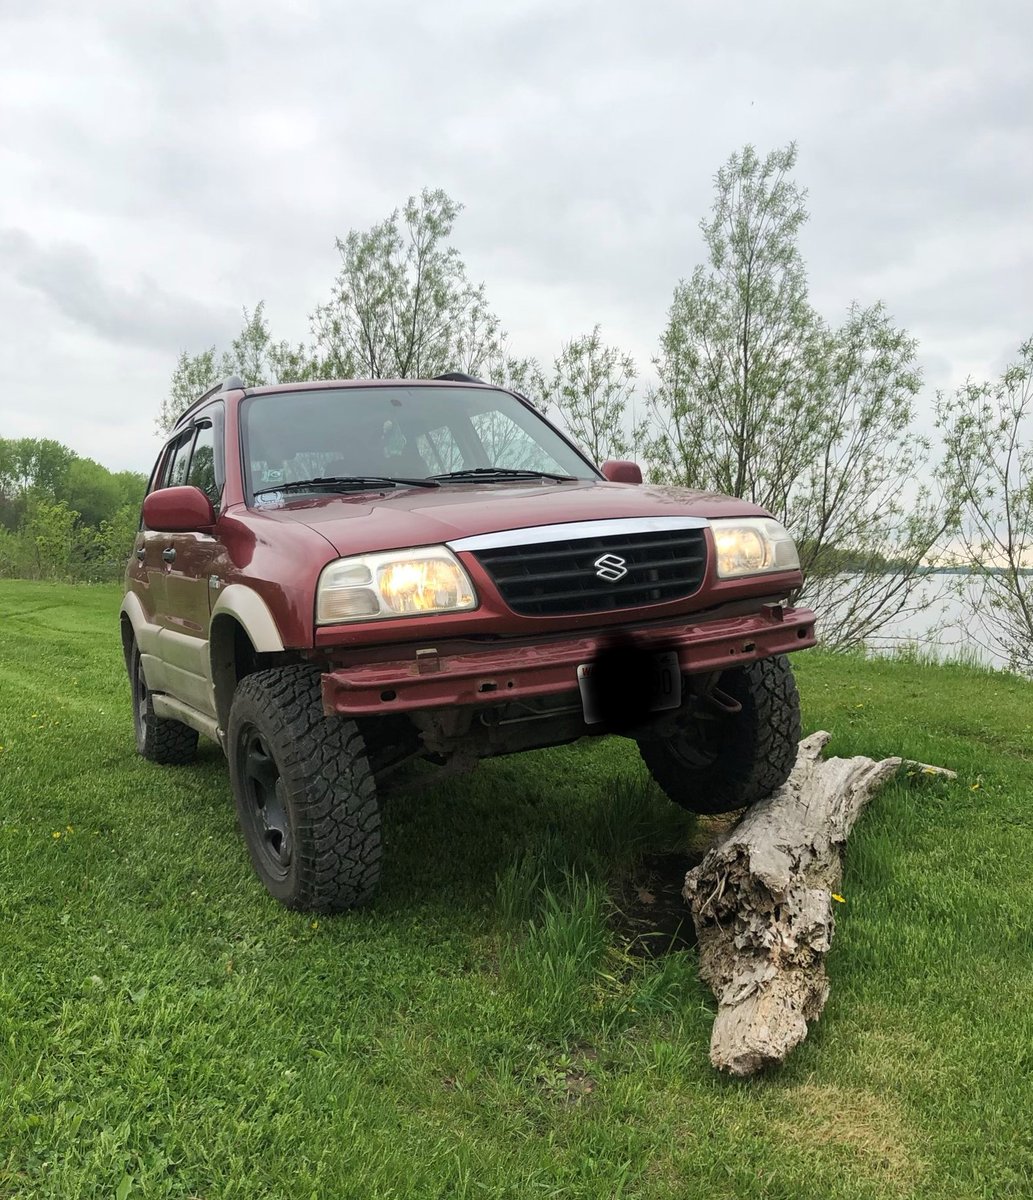 Thanks for sharing your awesome truck with us @dakota_eggers_74! 

Check out our website to get your Suzuki lift ON!

#supremesuspensions
#liftkit
#liftedsuzuki
#suzuki
#suzukivitara
#vitara
#4x4
#offroad
#offroading
#suzukilife
#suzukioffroad
#vitaraoffroad